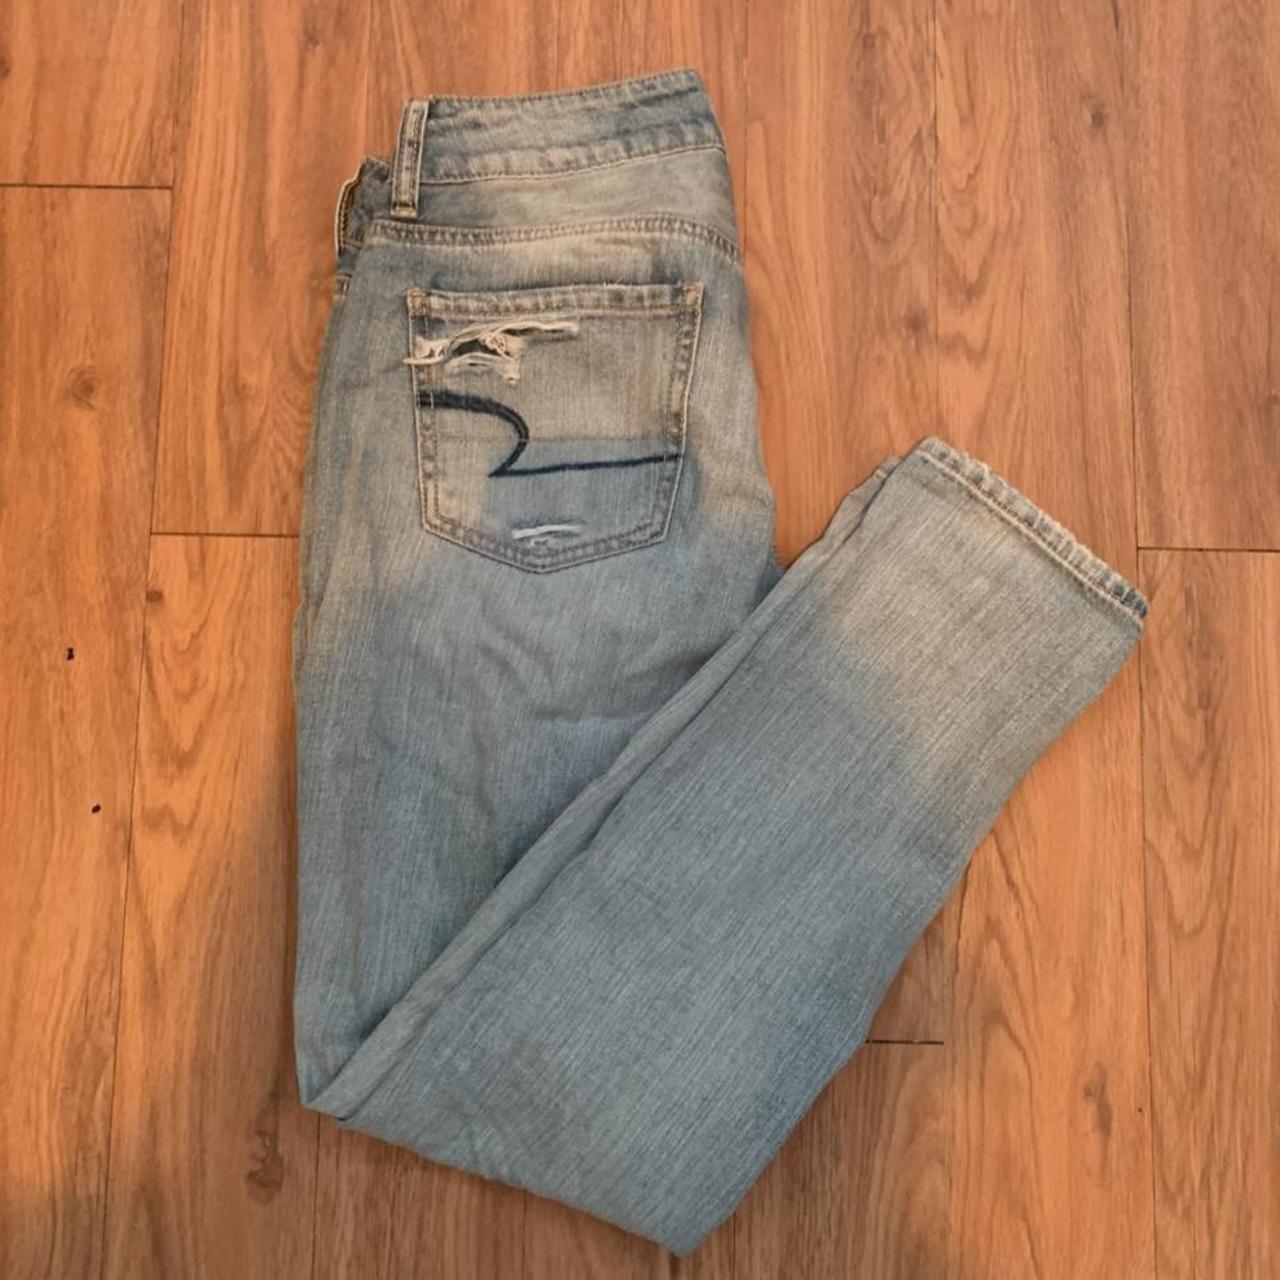 Brand new jeans, never worn, with tags Oversized, - Depop